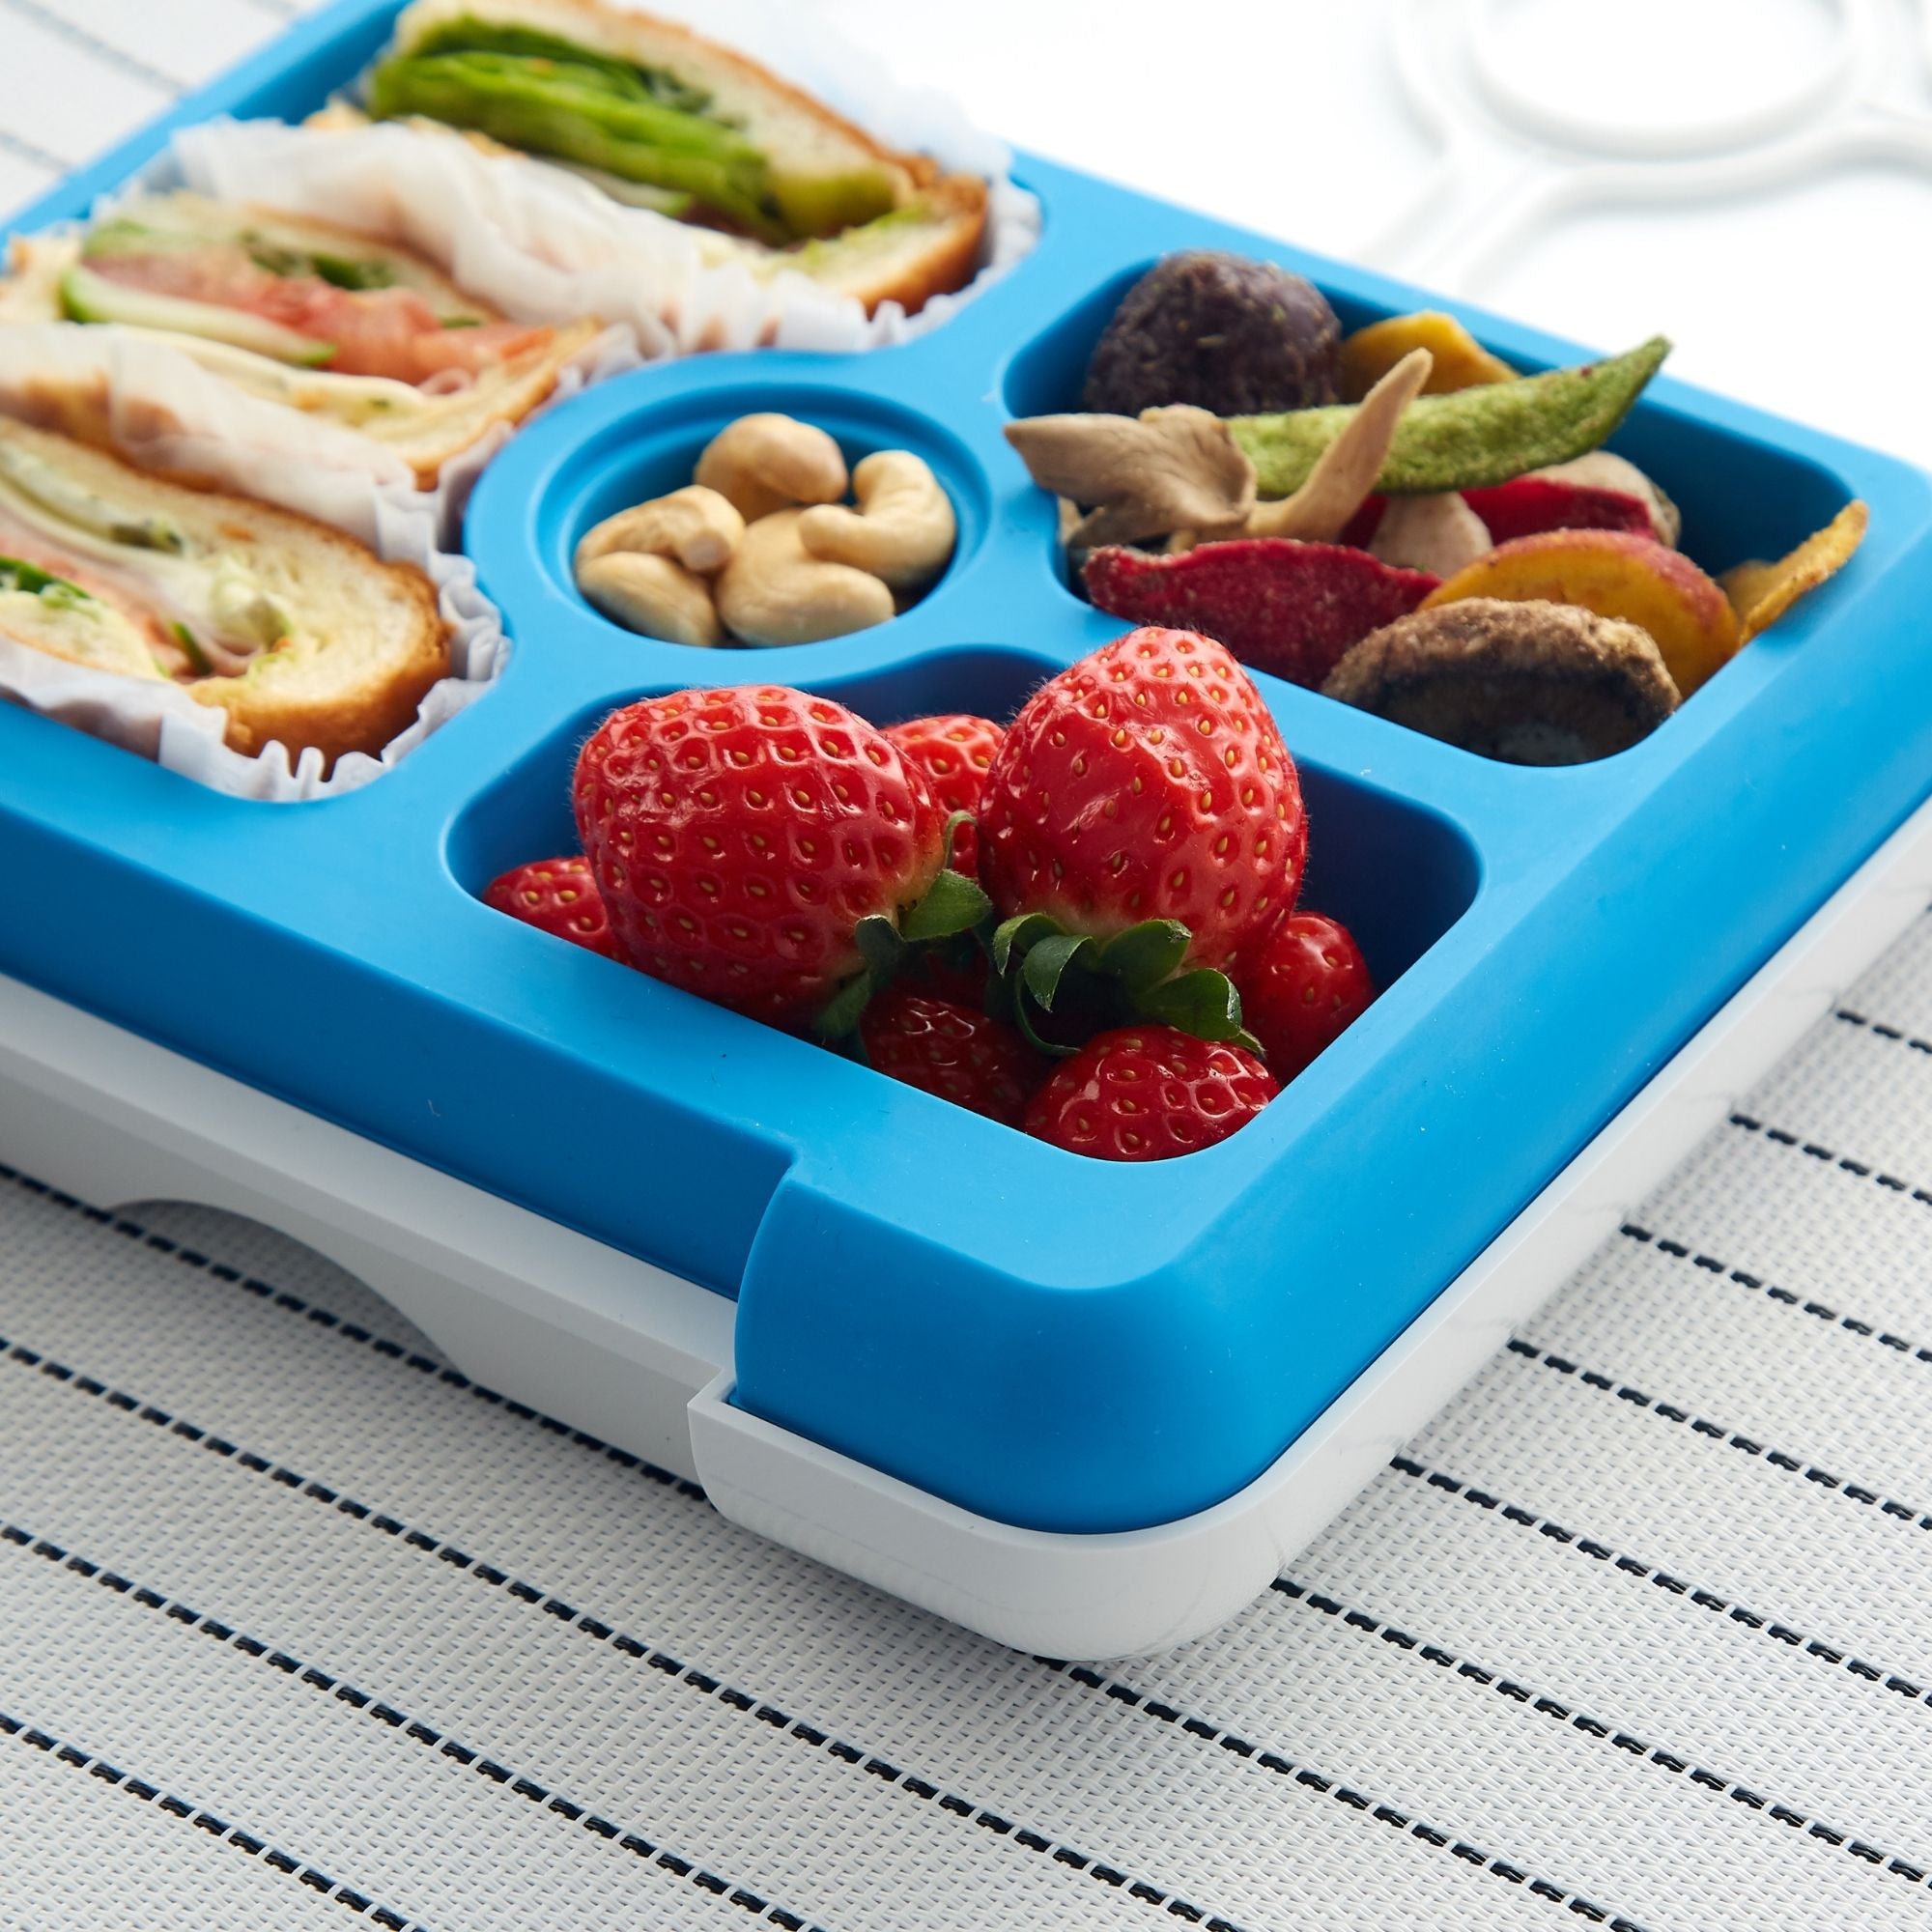 Flex&Lock Flexbox Kids Platinum Silicone Food Tray Lunch Box Set with Accessories - Leak Proof, Clean Lid Design, Microwavable, Dishwasher Safe